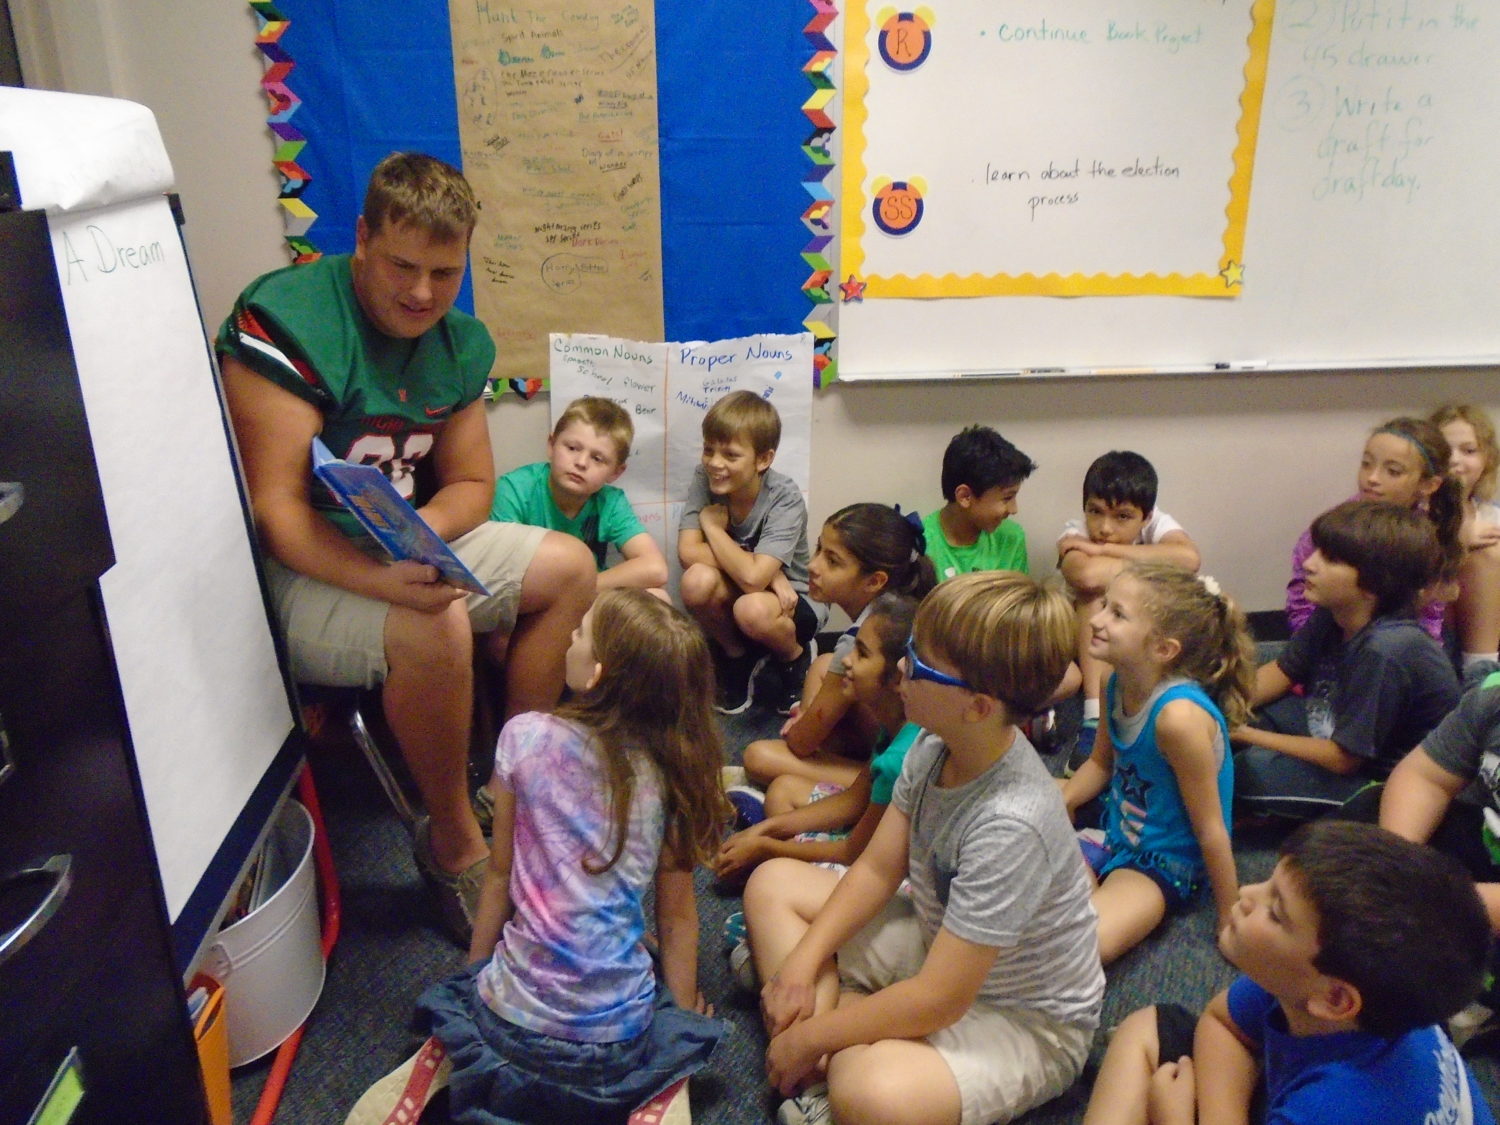 A football player from The Woodlands HS read to Ms. Johnson's fourth grade class at Galatas Elementary.